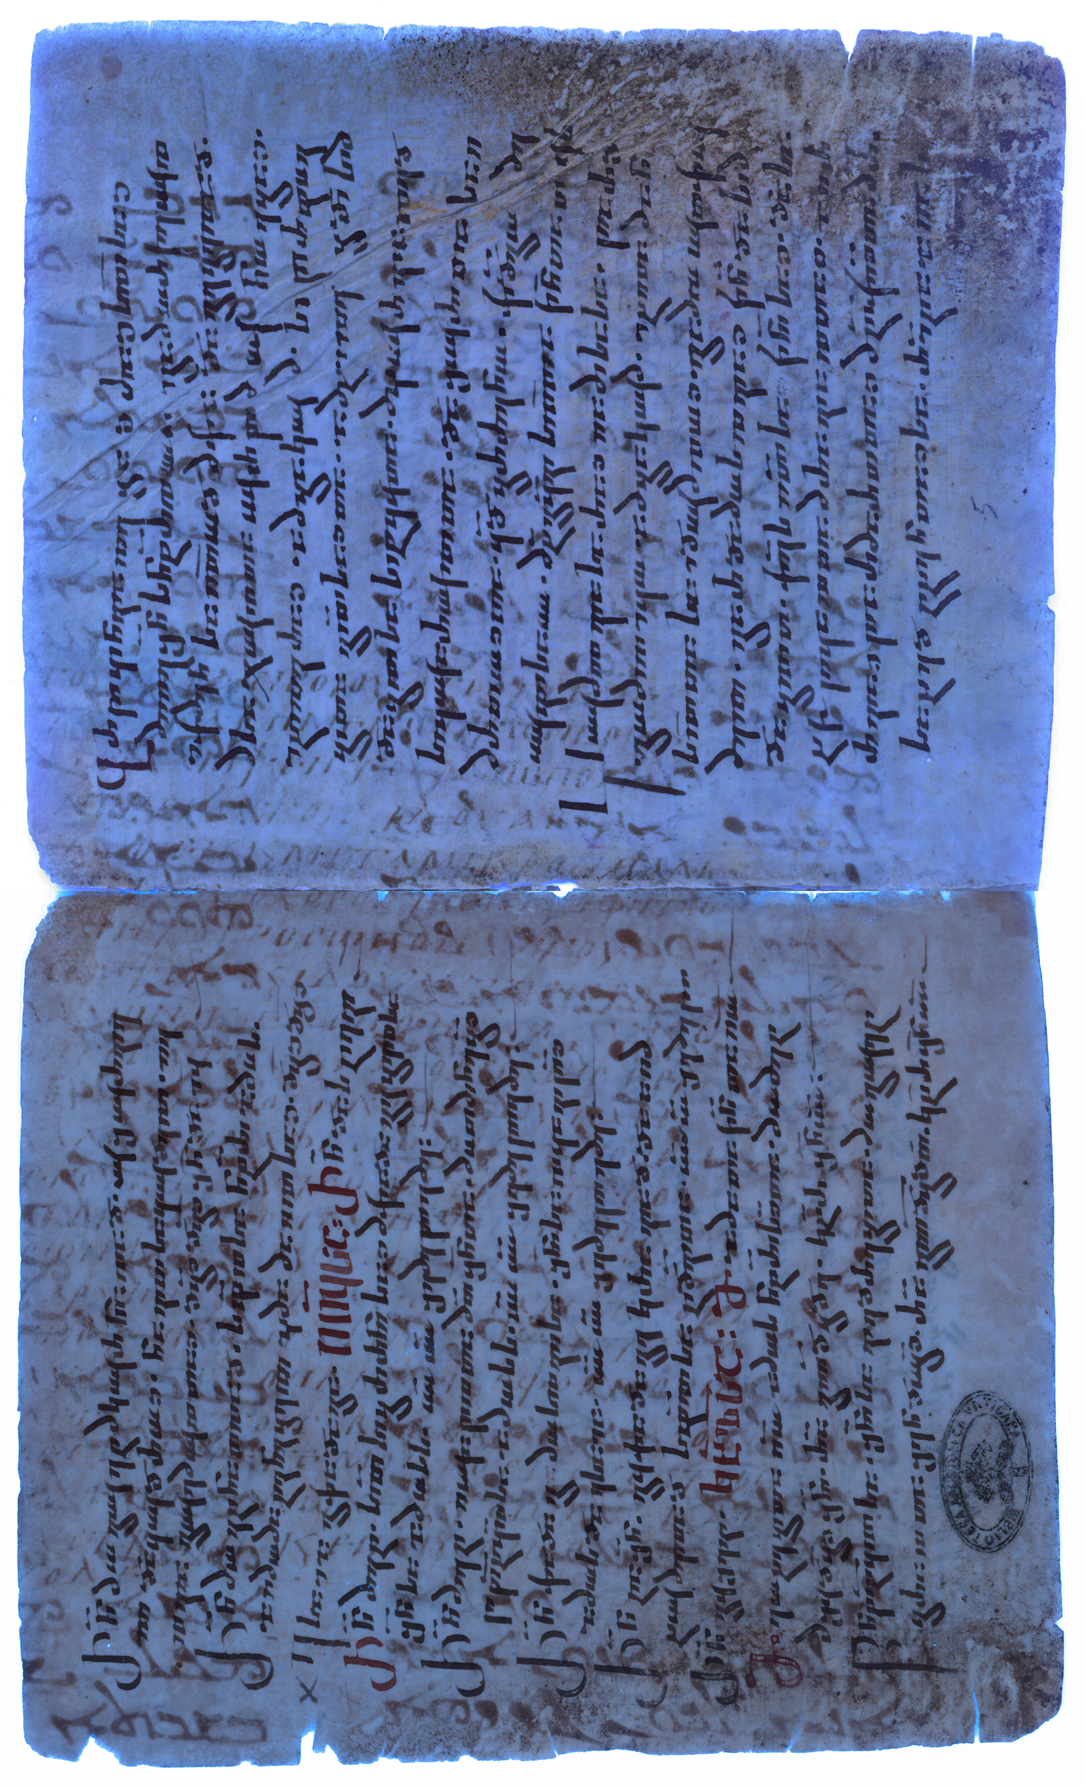 A New (Double Palimpsest) Witness to the Old Syriac Gospels (Vat 